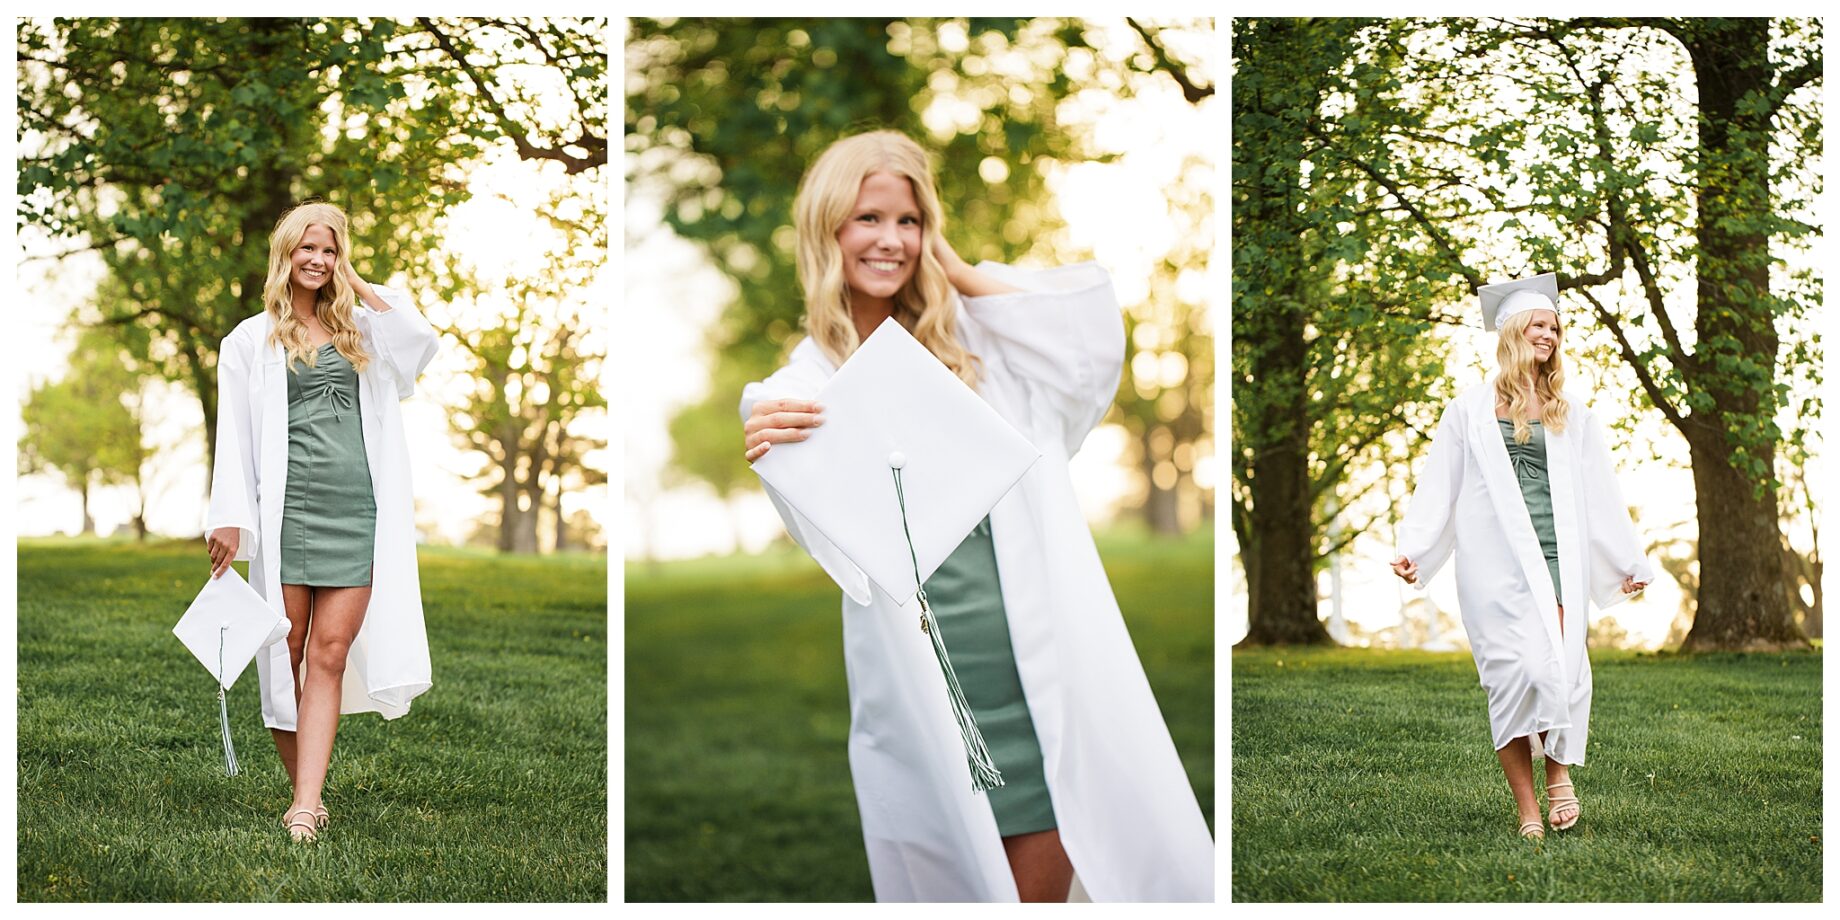 perryville missouri senior high school photographer, cap girardeau senior high school photographer, farmington missouri senior high school photographer, cape and gown, white gown, golden sun, mini session, blonde hair